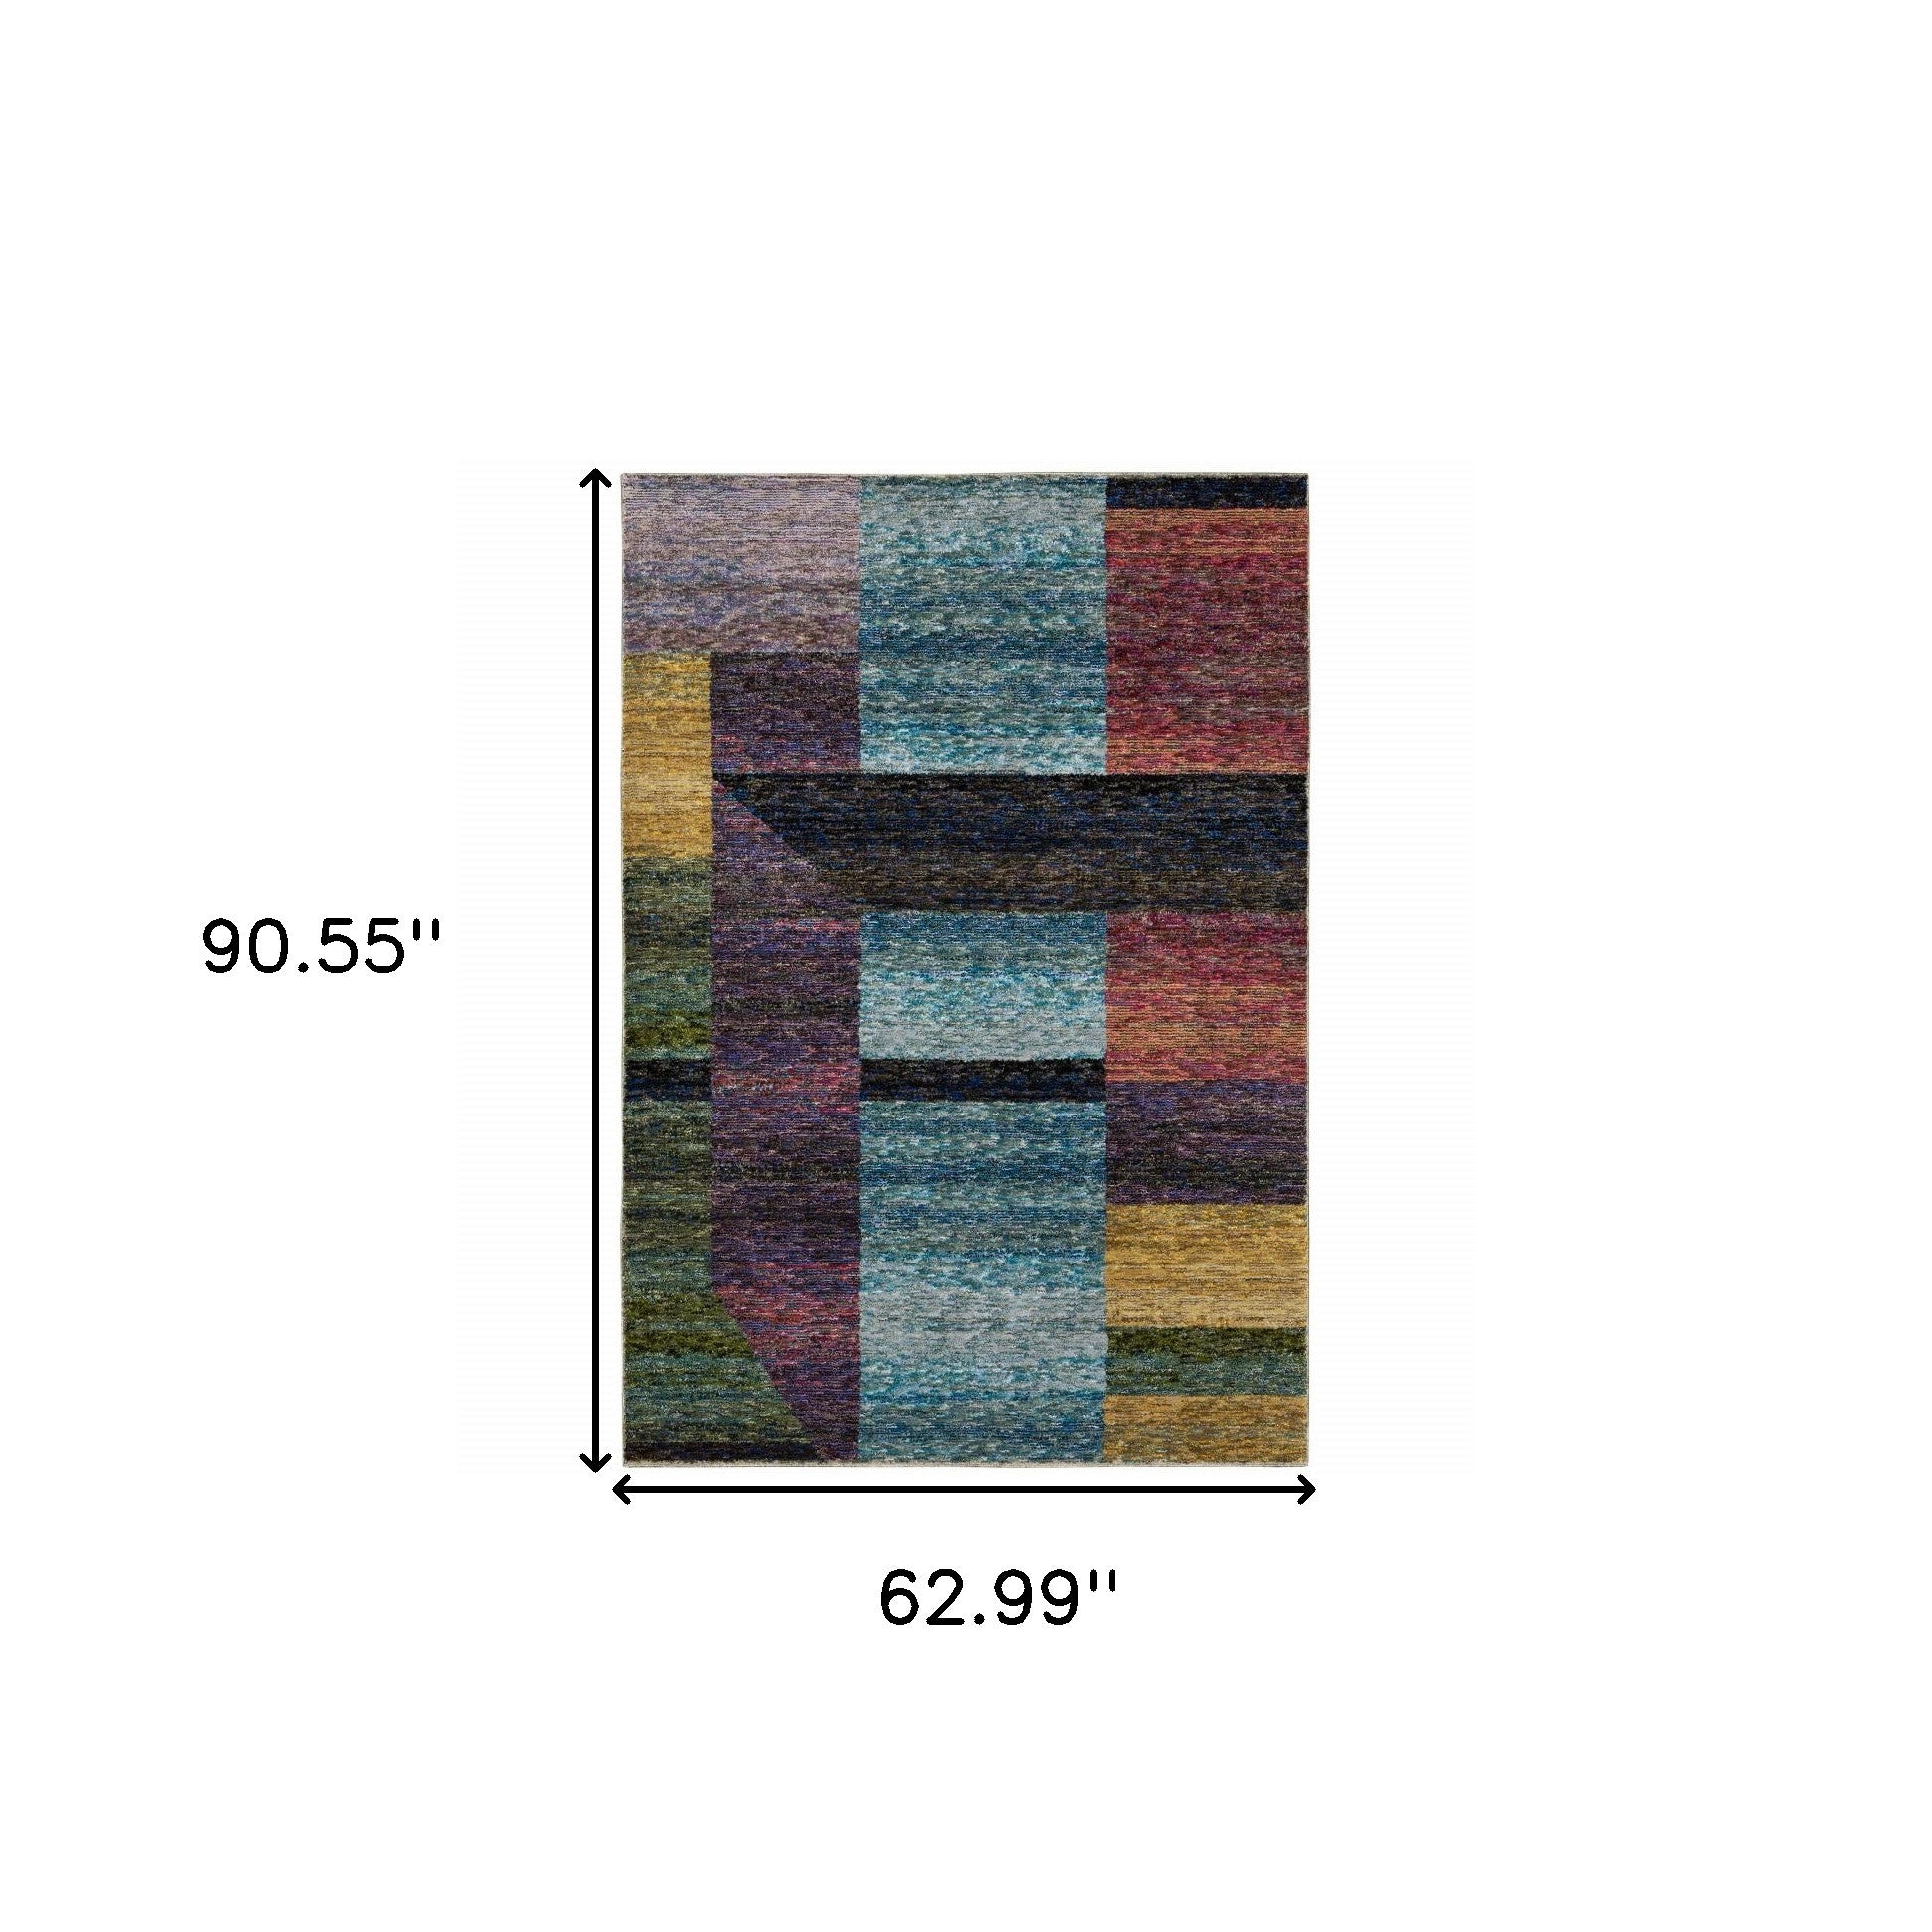 5' X 7' Purple Blue Teal Gold Green Red And Pink Geometric Power Loom Stain Resistant Area Rug